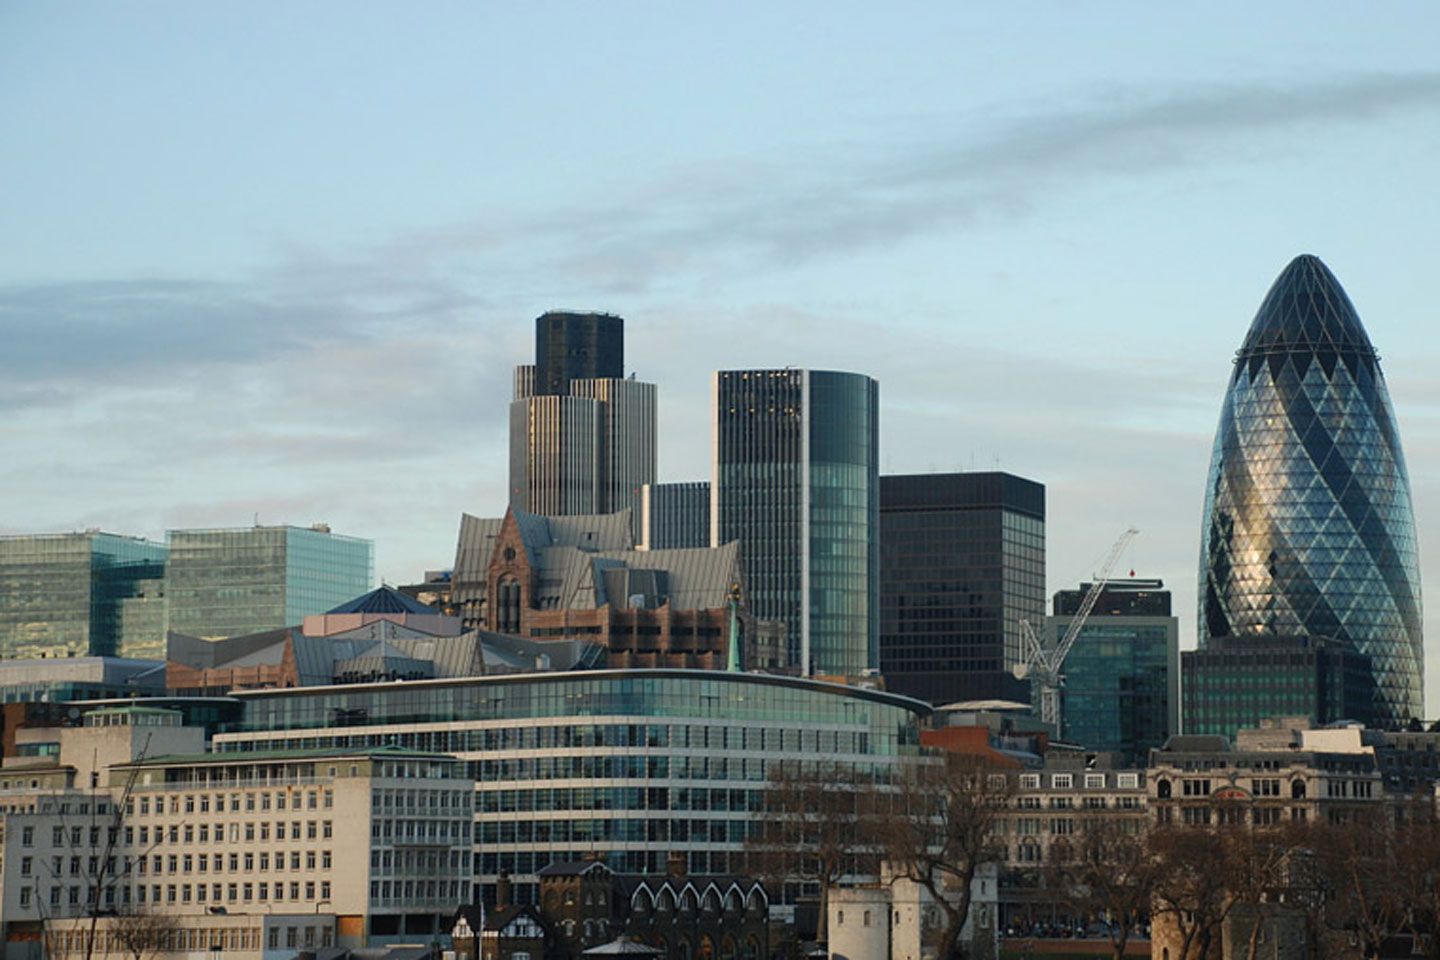 london - old town and financial district - artchitectours